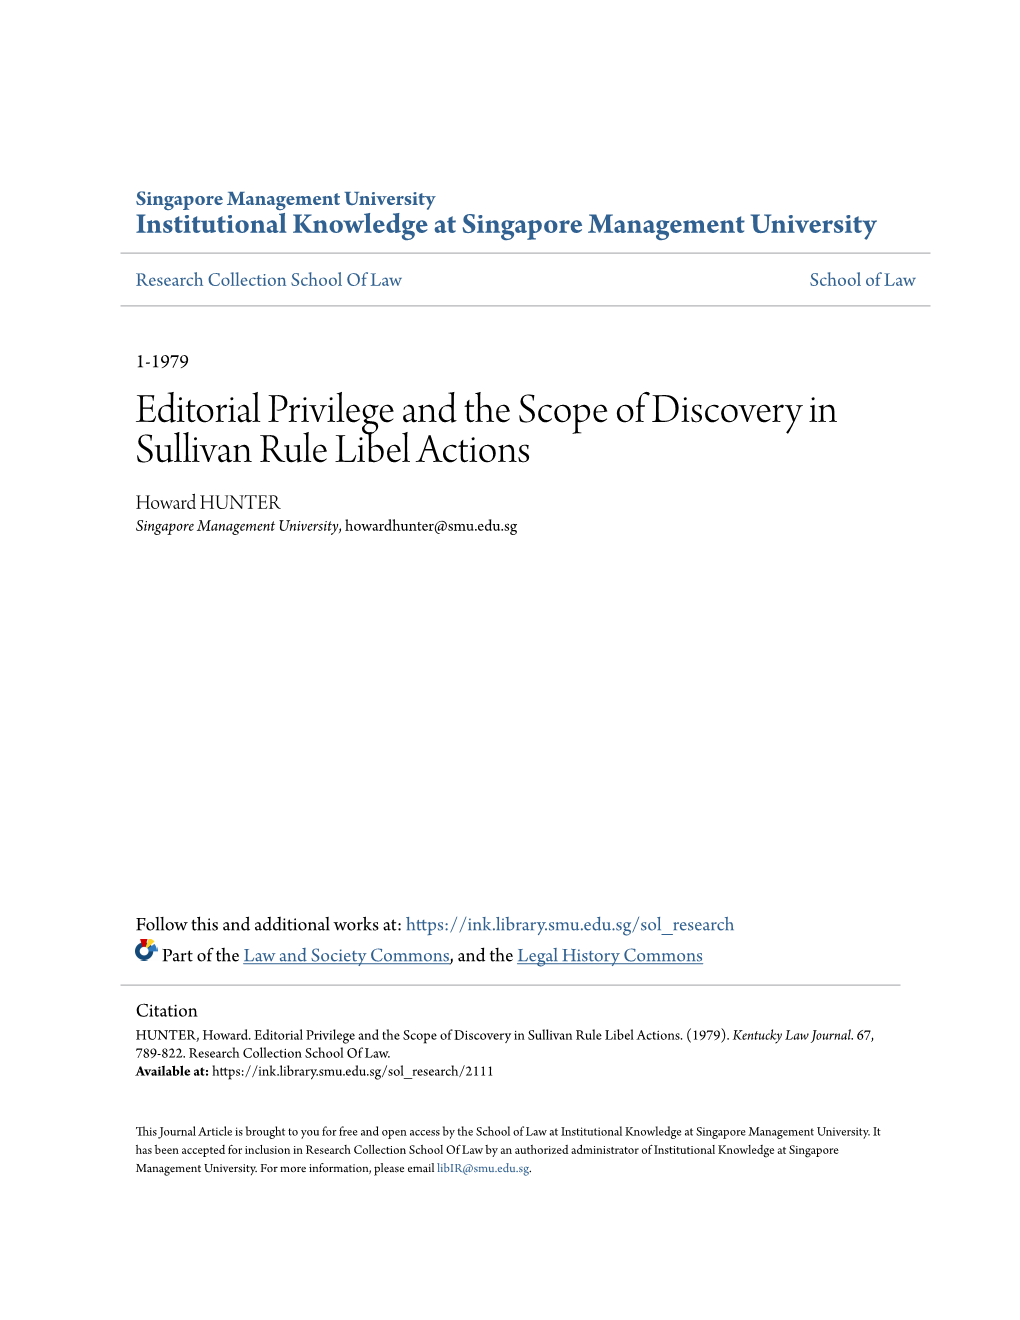 Editorial Privilege and the Scope of Discovery in Sullivan Rule Libel Actions Howard HUNTER Singapore Management University, Howardhunter@Smu.Edu.Sg